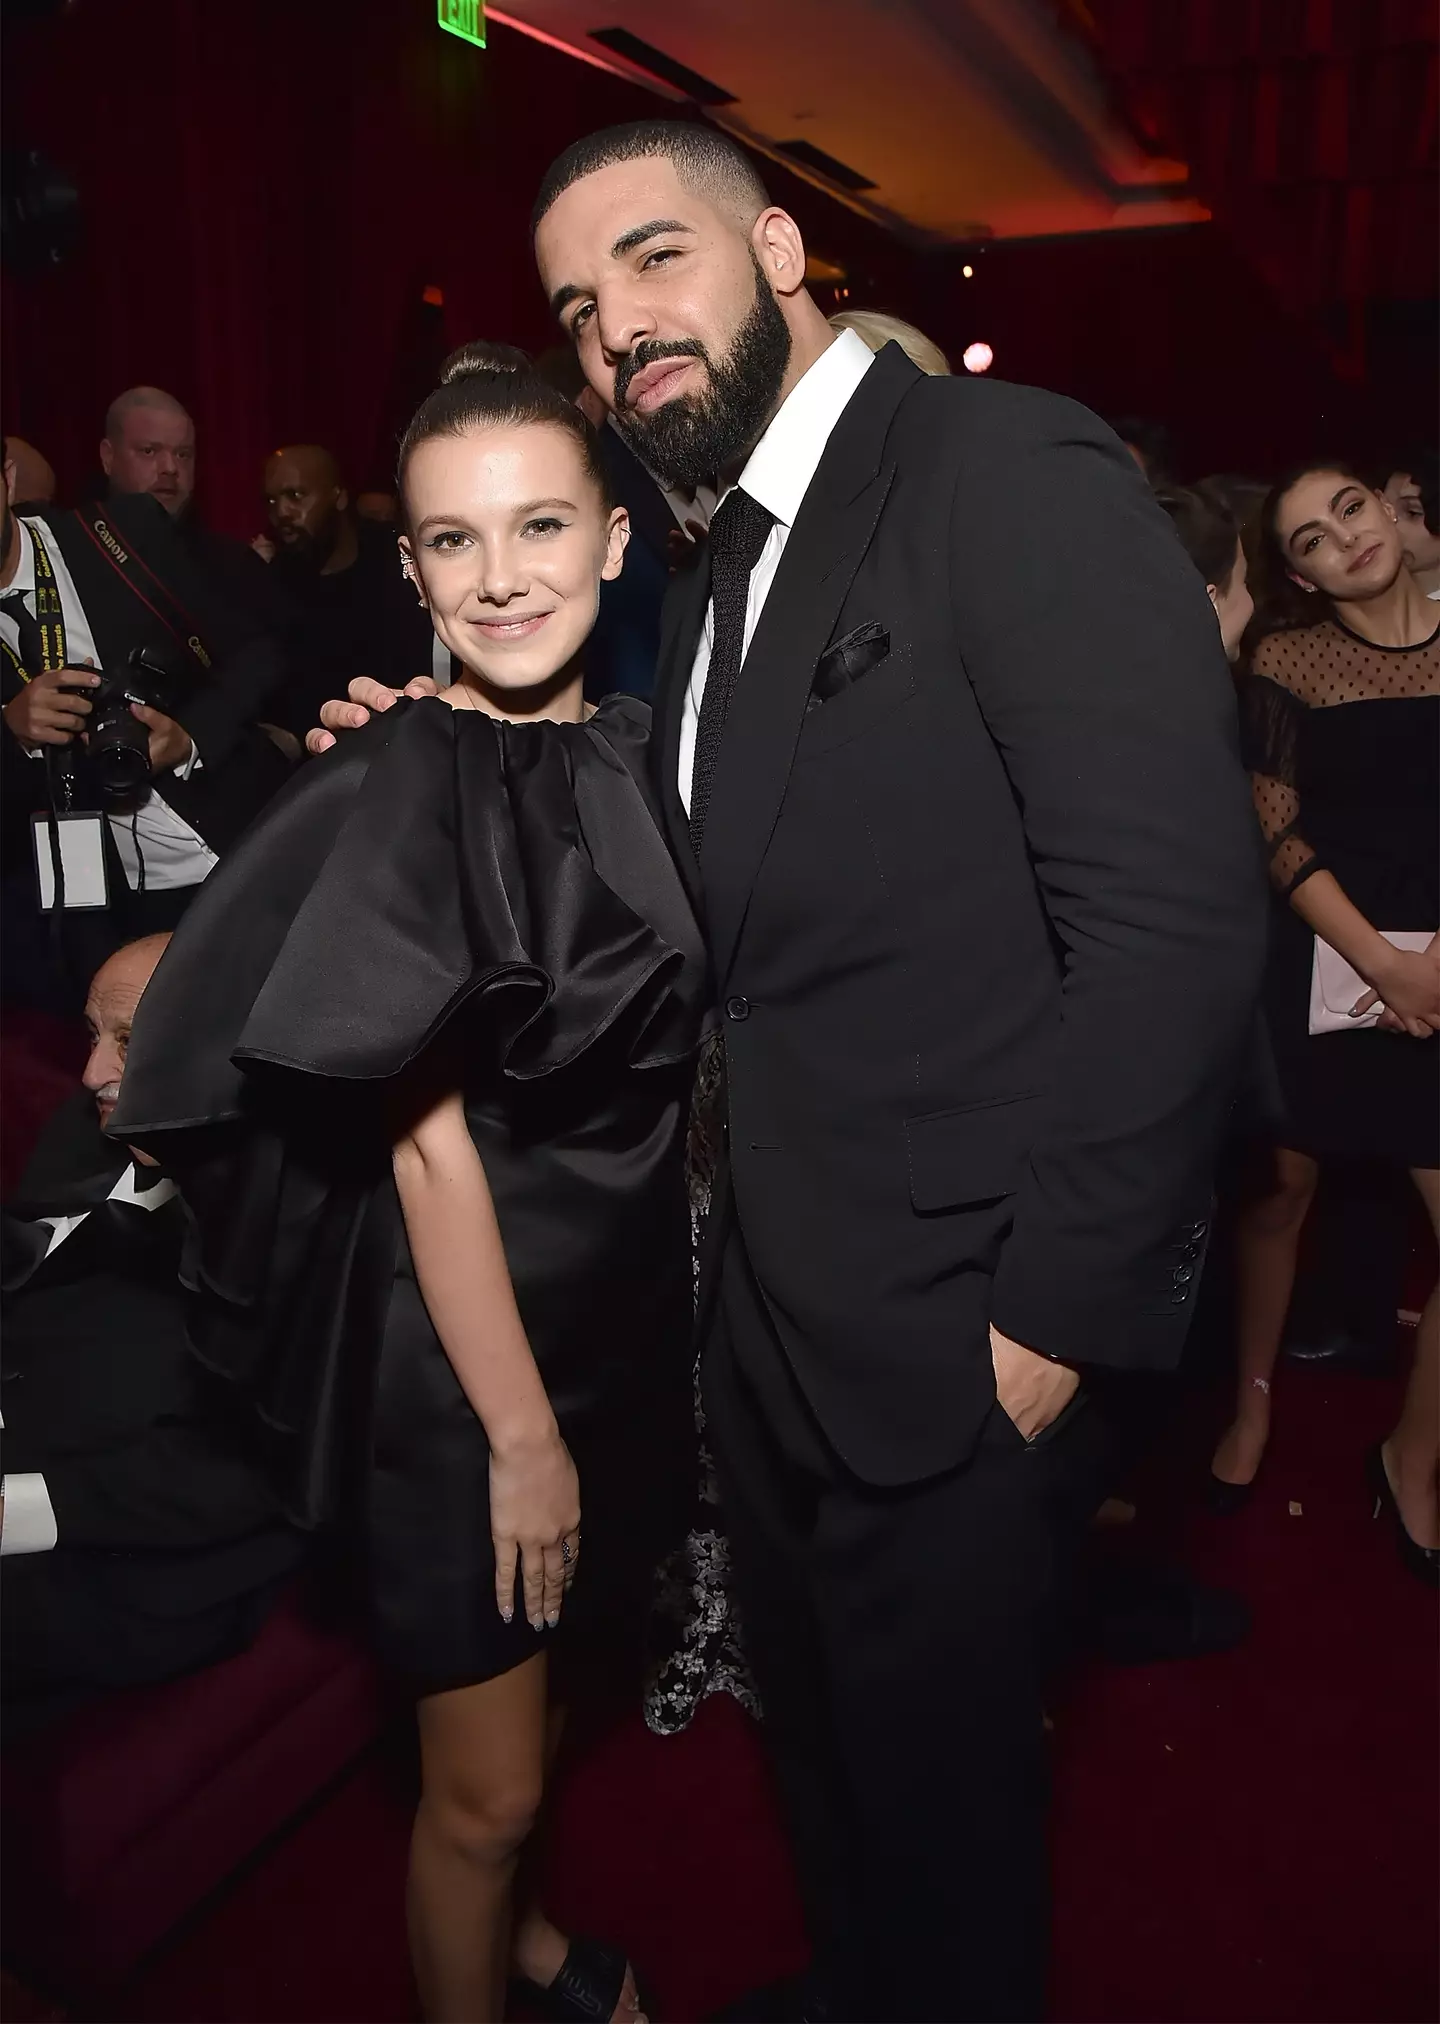 Millie Bobby Brown and Drake in 2018. (Kevin Mazur/Getty Images for Netflix)